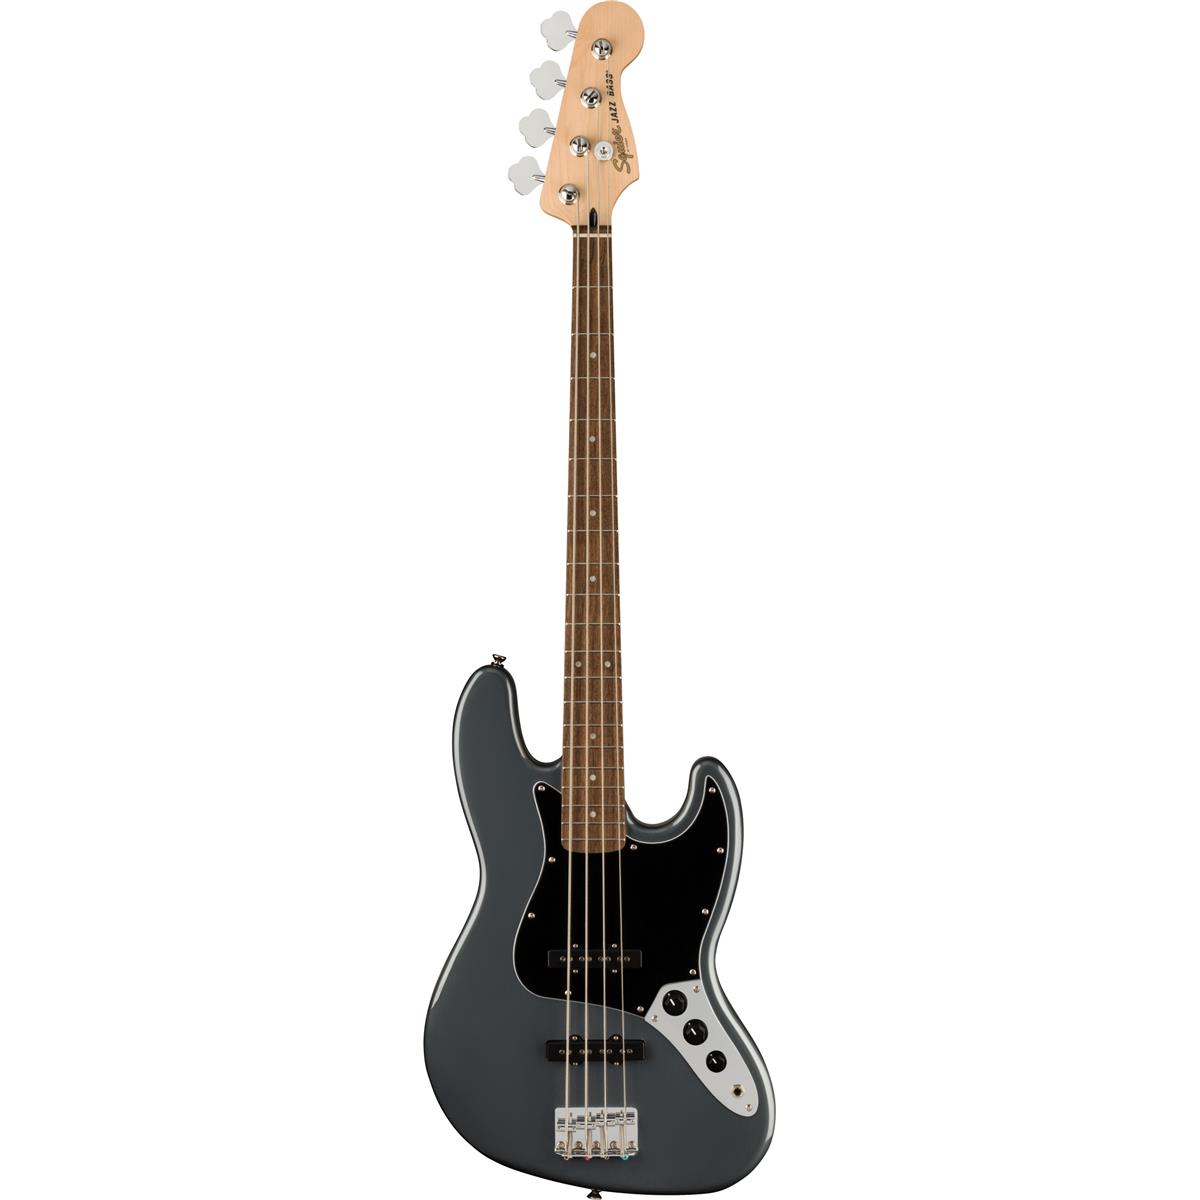 Image of Squier Affinity Jazz Bass Guitar